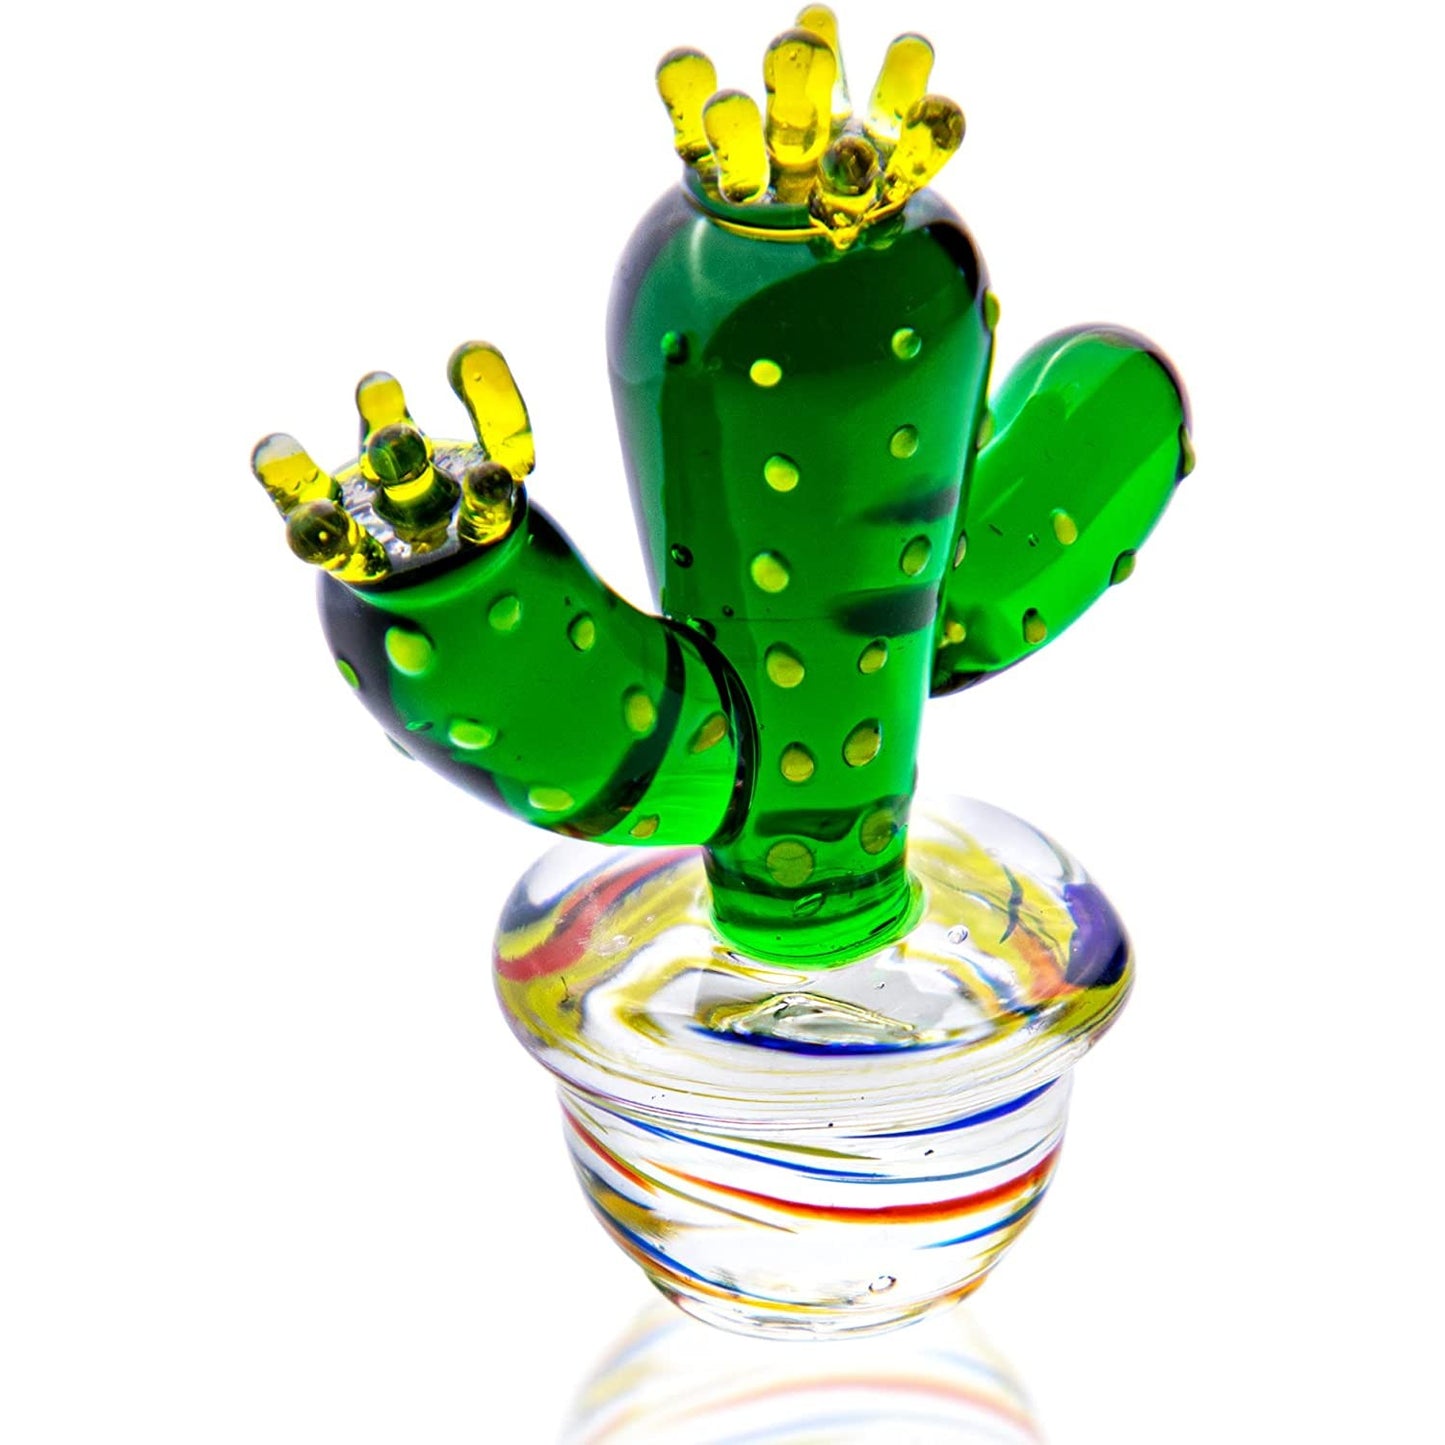 A green colored small cactus figurine made of glass.